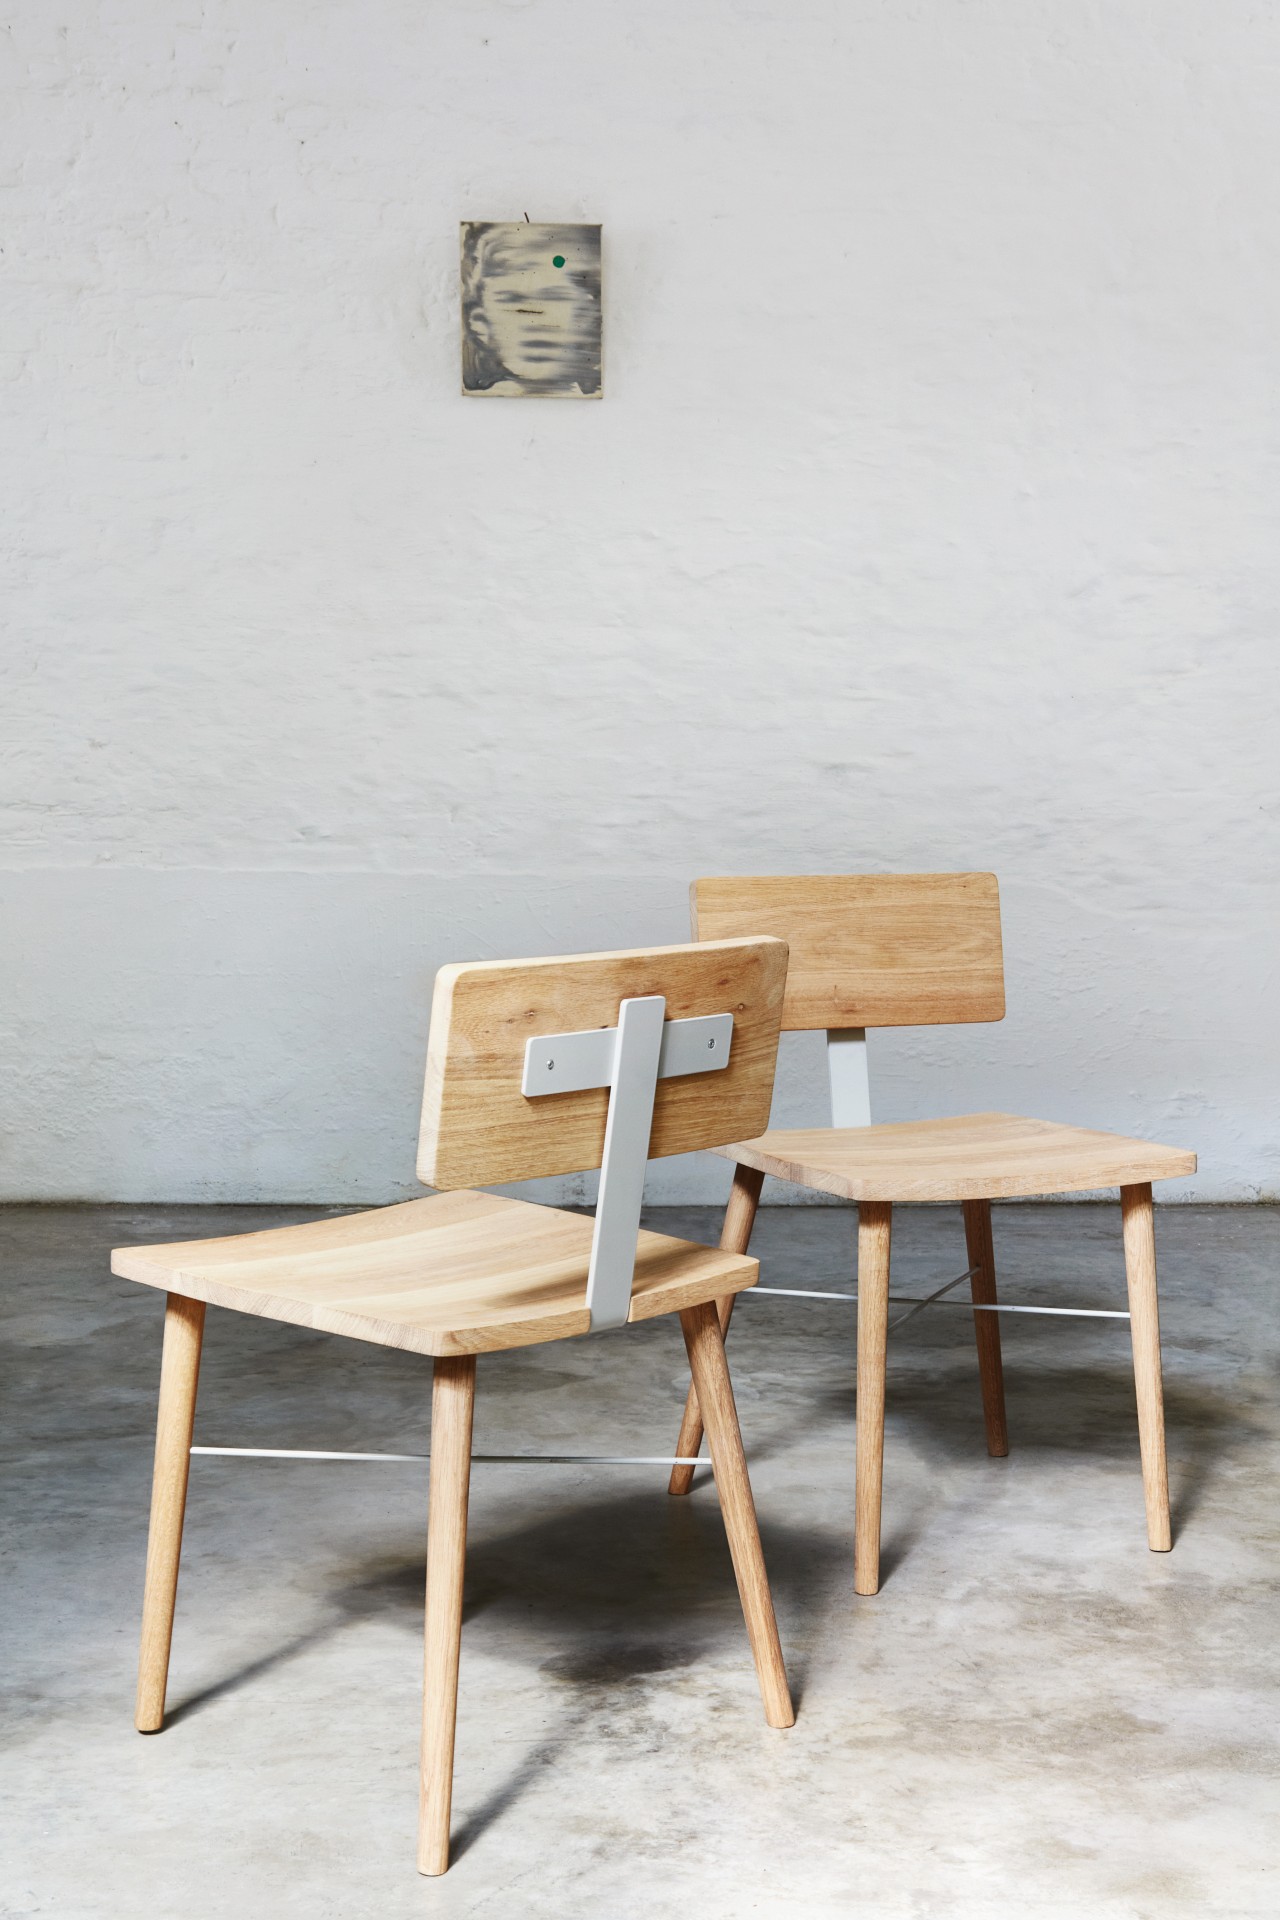 DOWEL Chairs by Jonas Wahlström for Universo Positivo